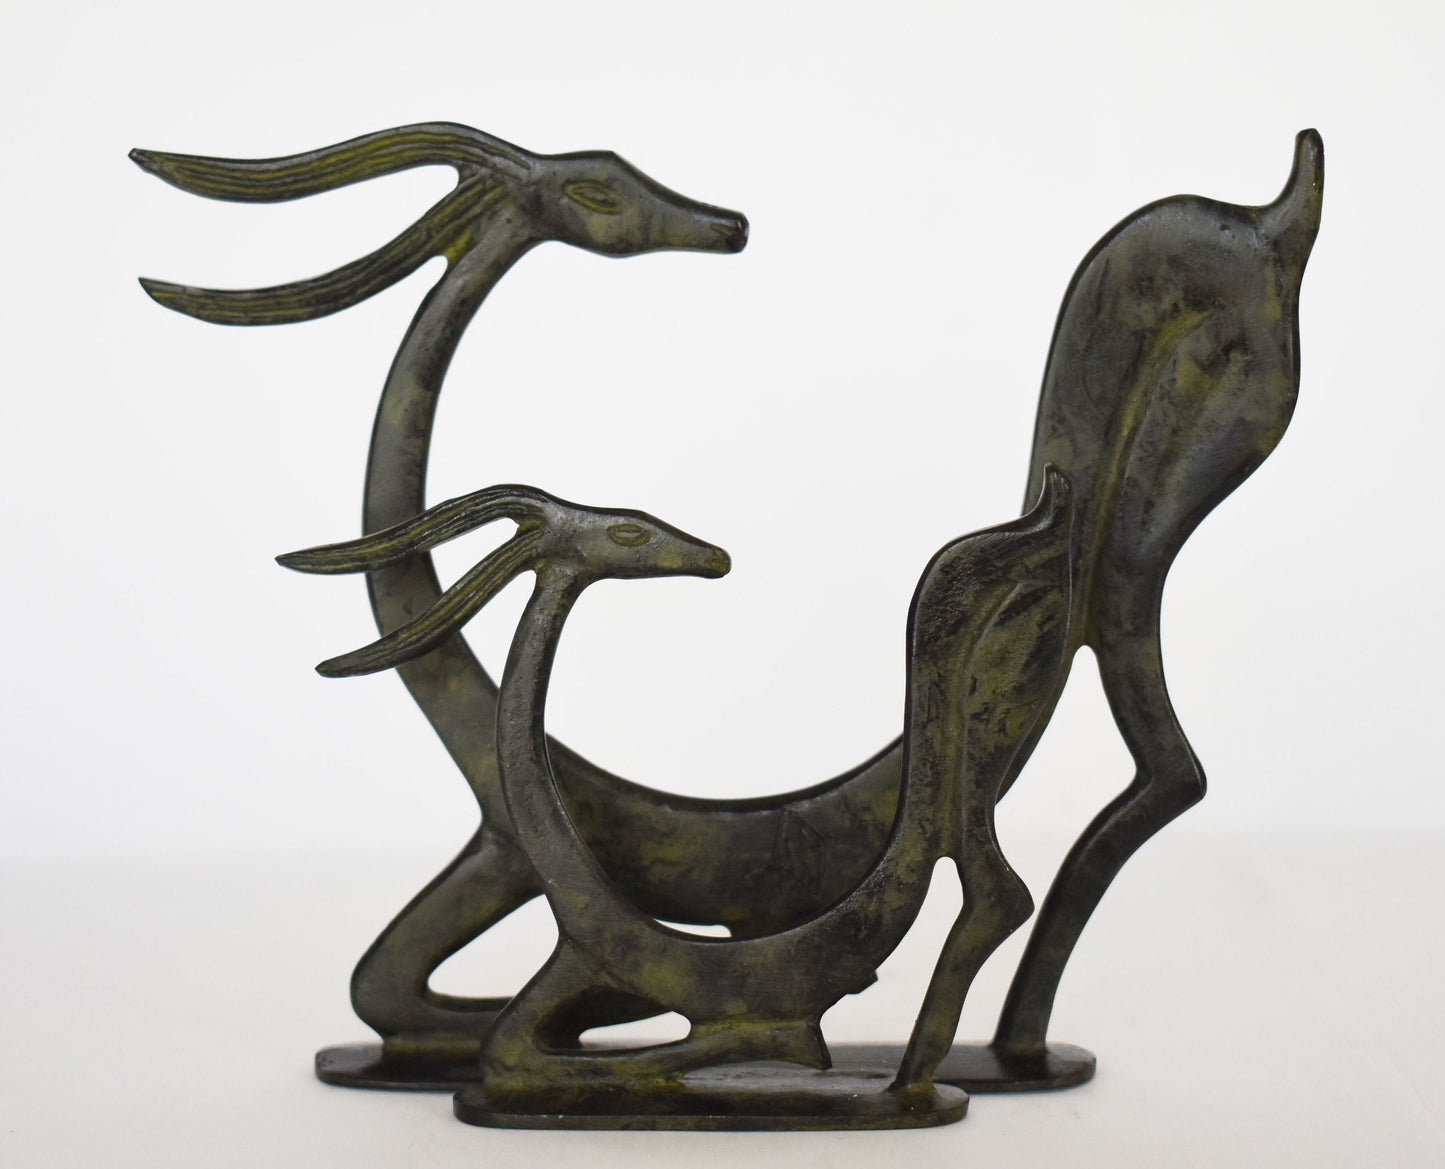 Complex with 2 Graceful Ibex - pure Bronze Sculpture - Symbols of Energy, Long Life, Fertility